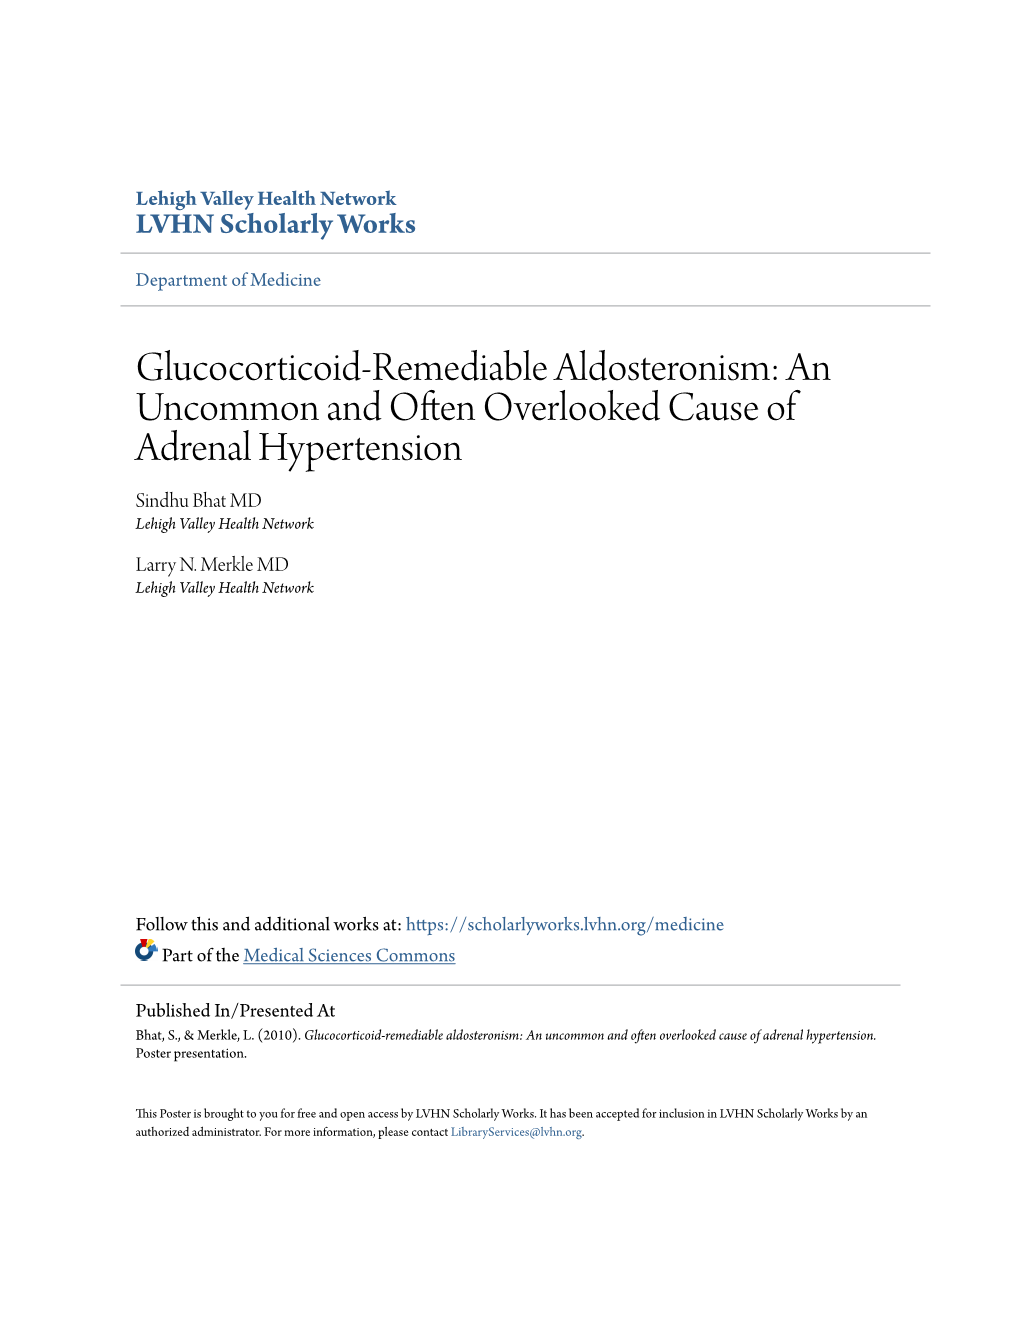 Glucocorticoid-Remediable Aldosteronism: an Uncommon and Often Overlooked Cause of Adrenal Hypertension Sindhu Bhat MD Lehigh Valley Health Network